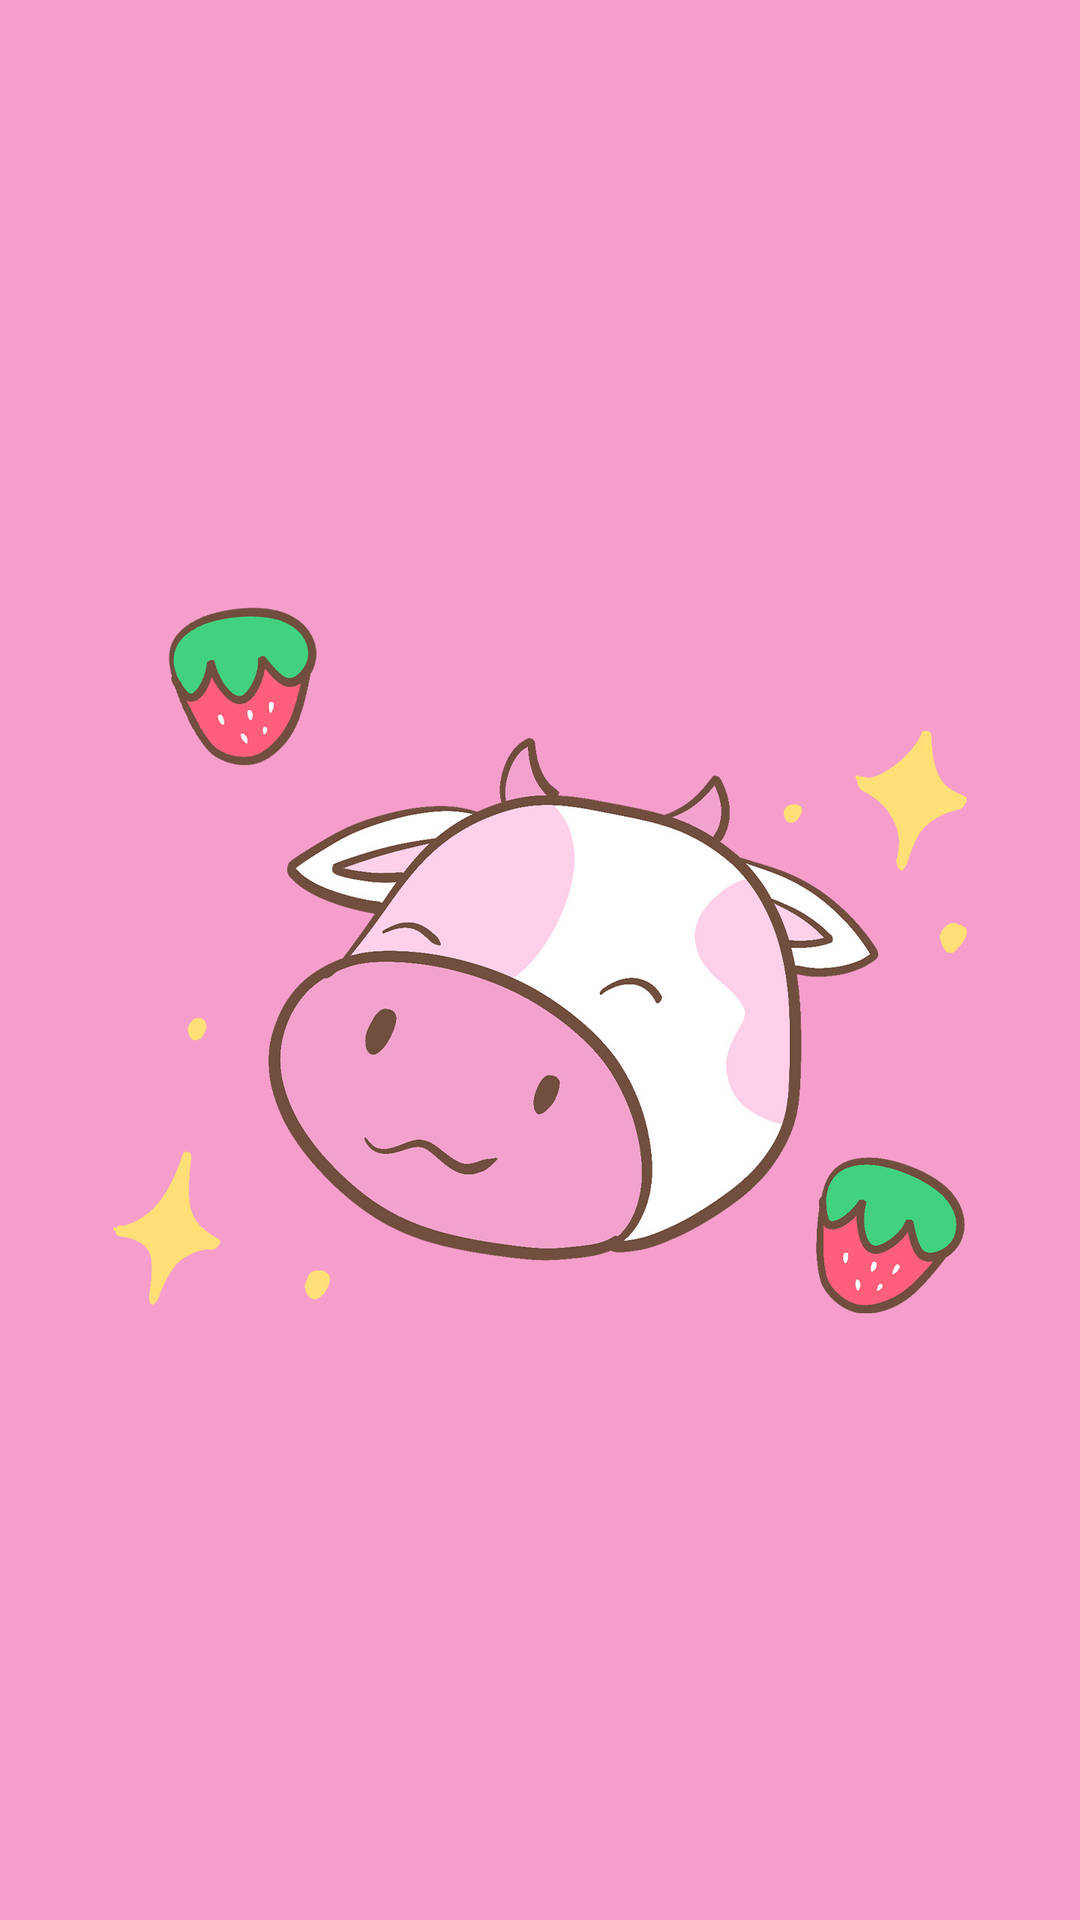 Strawberry Cow by ernestng1 on DeviantArt